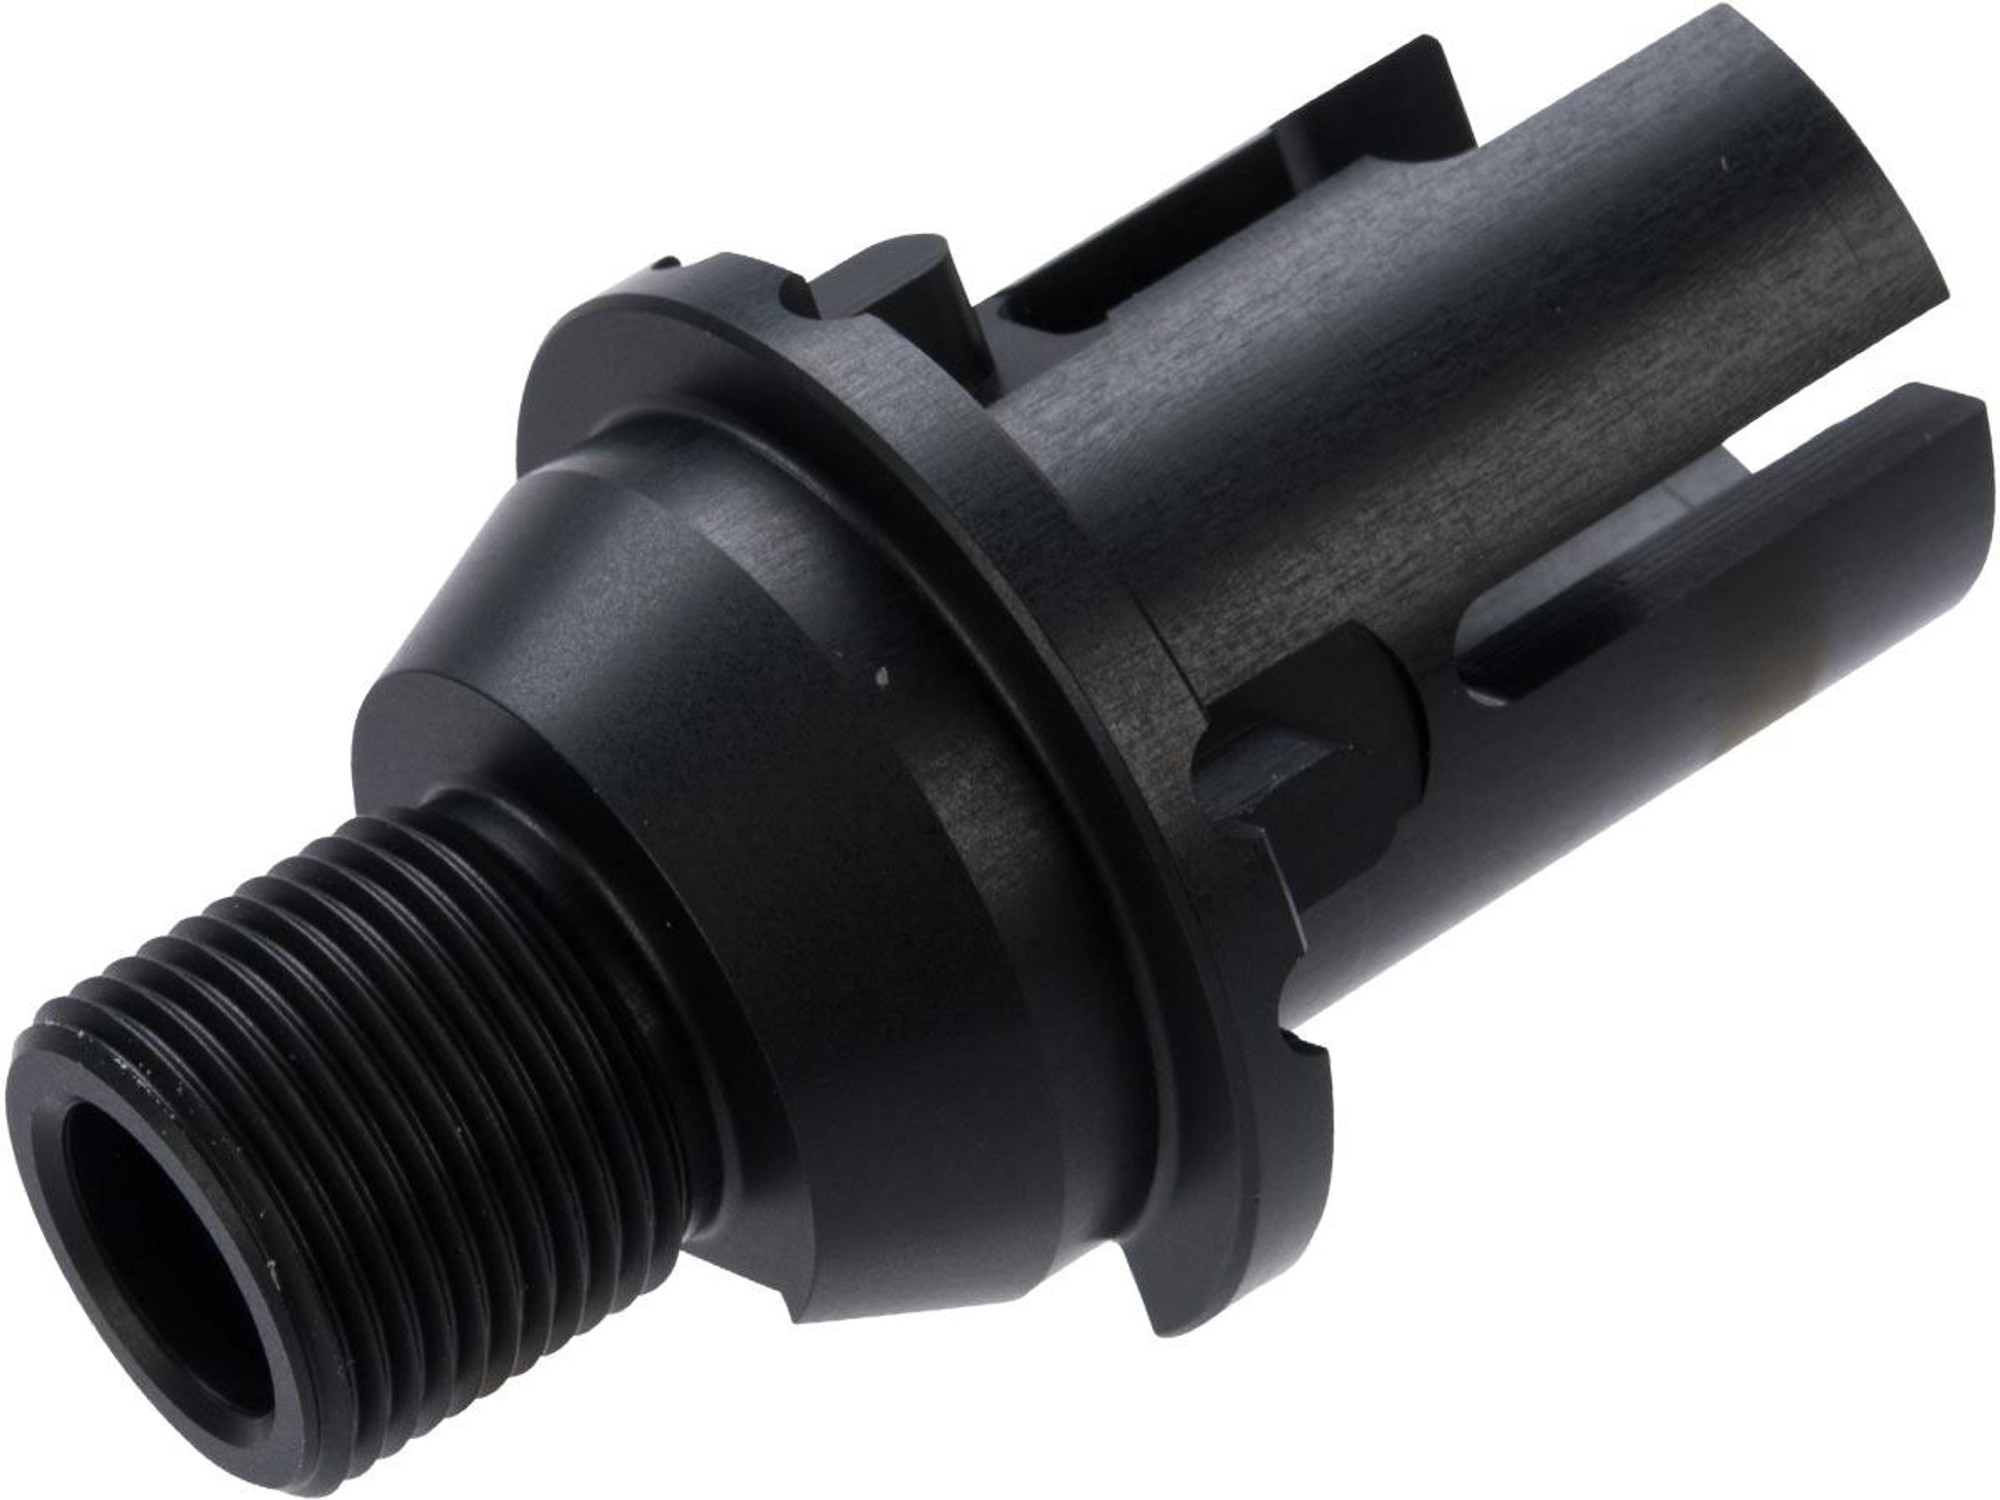 Laylax "Short" Outer Barrel Base for M4 Airsoft AEG (Type: Standard)